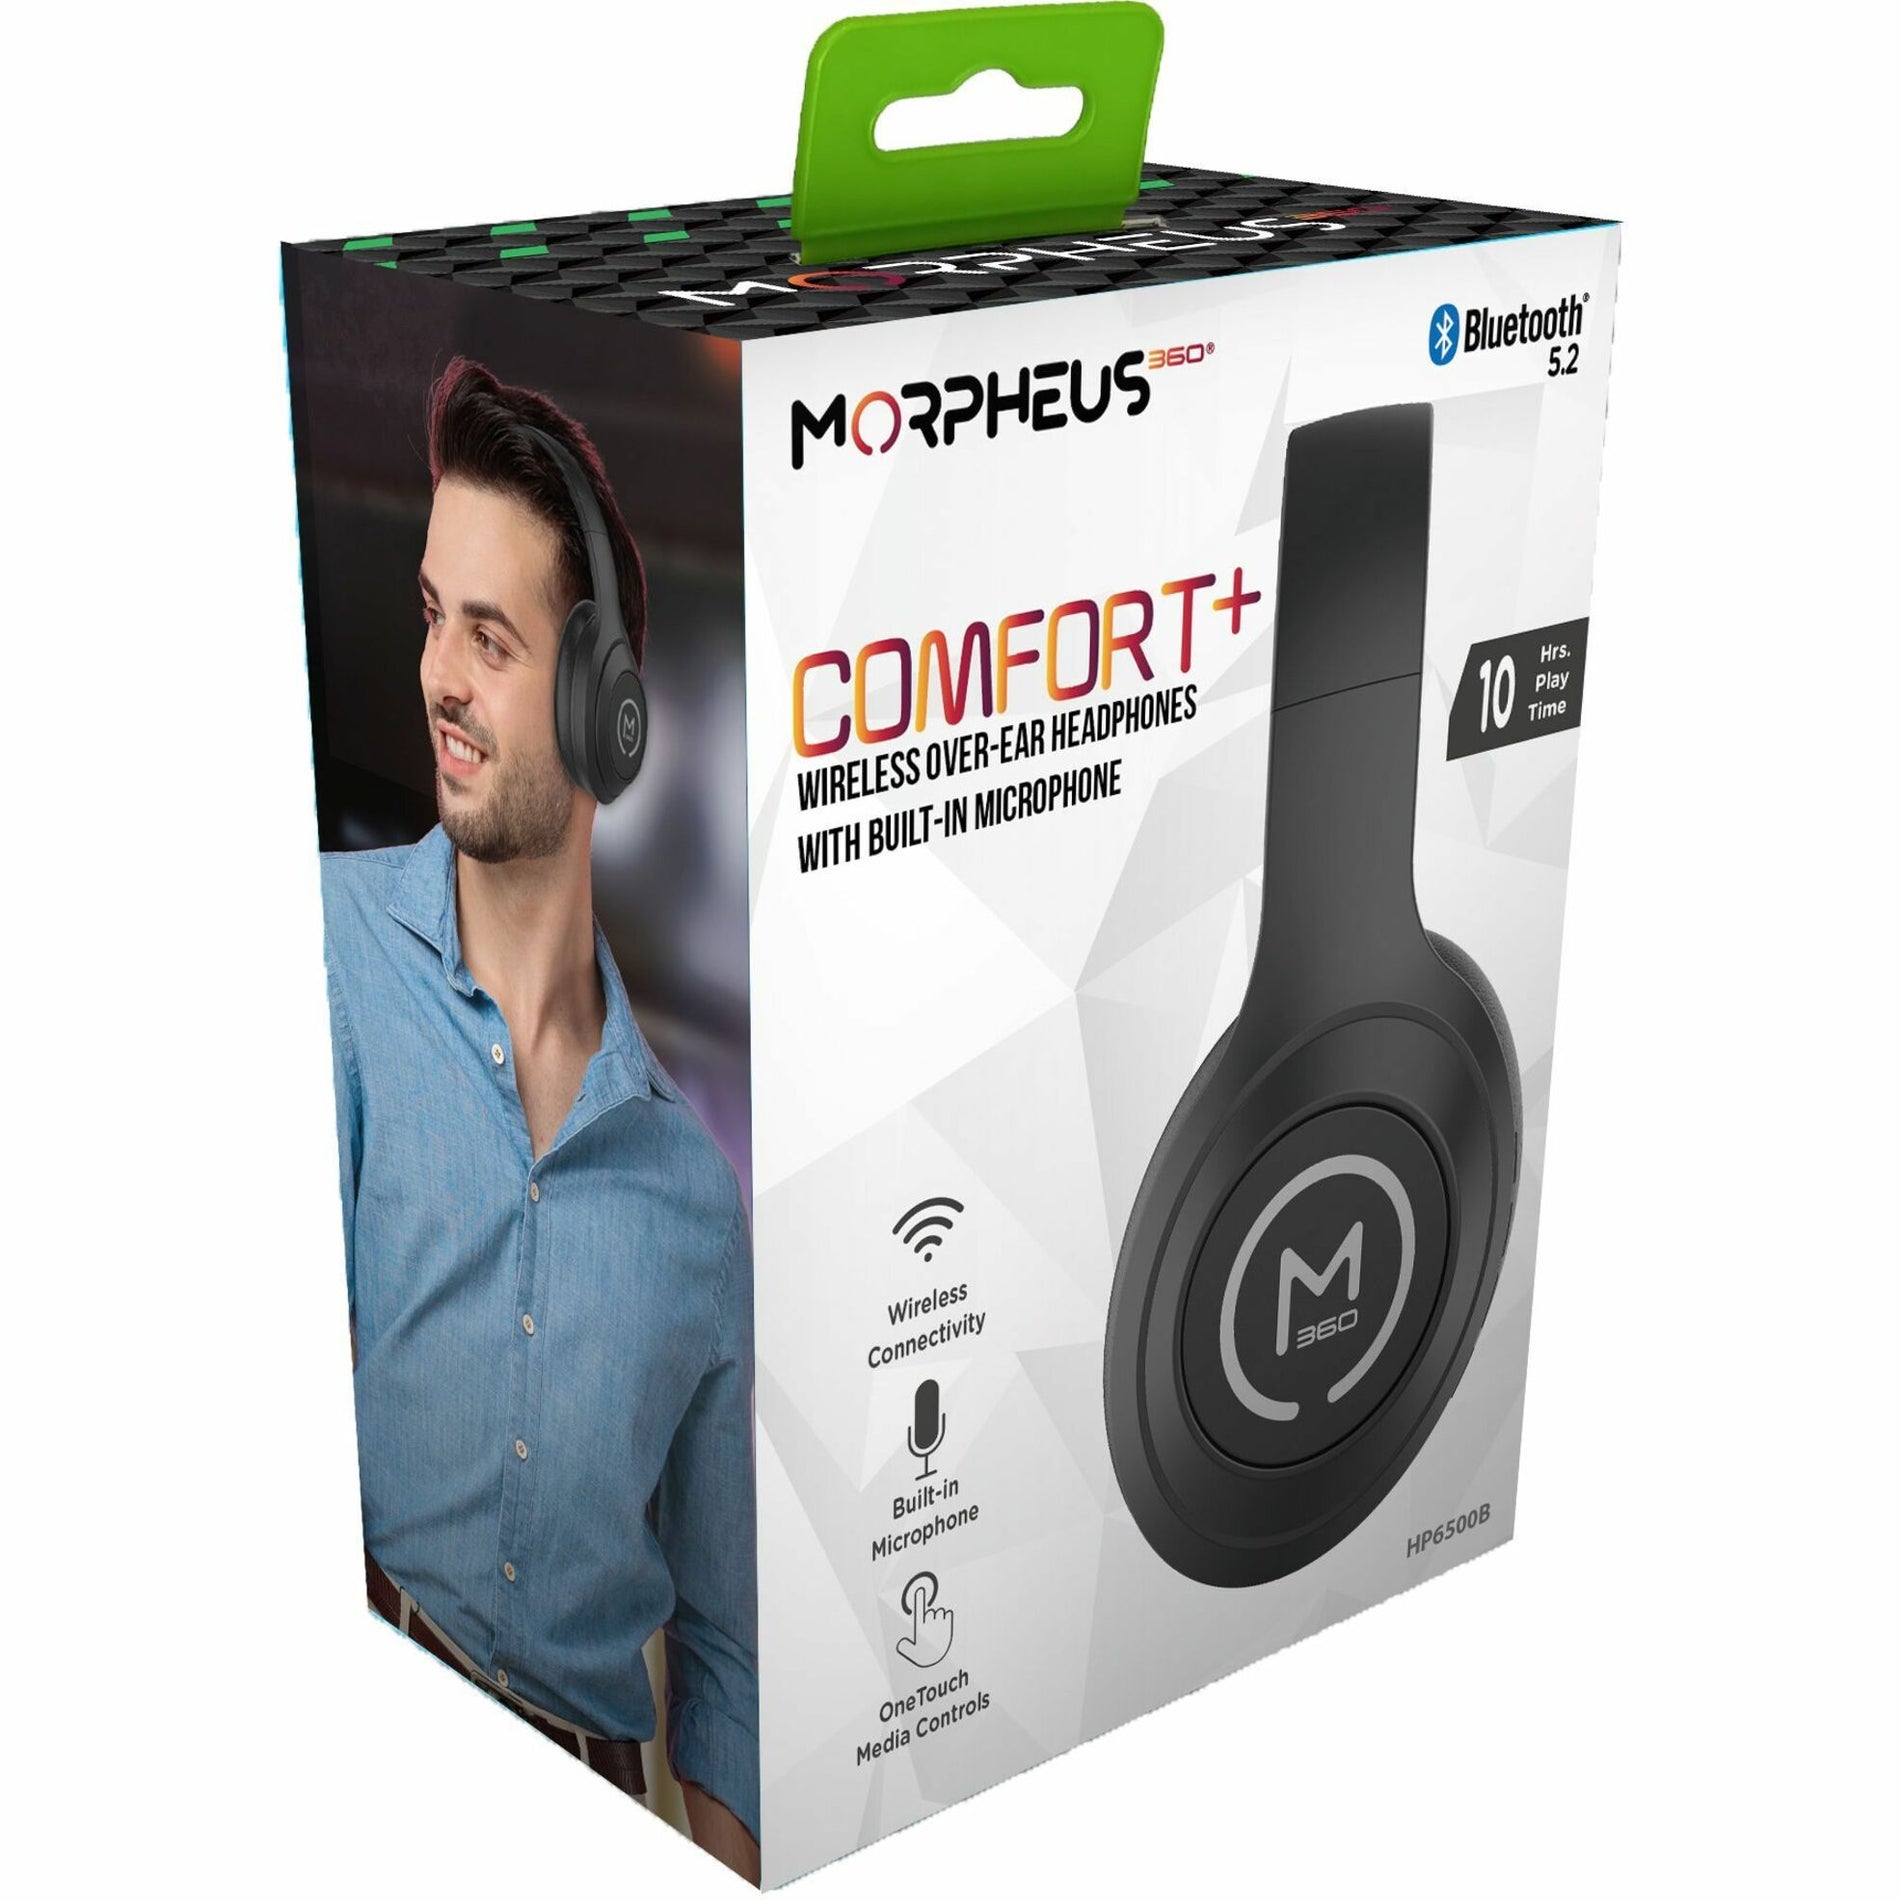 Morpheus 360 HP6500L COMFORT+ Wireless Stereo Headphone, Over-the-ear, Over-the-head, Blue